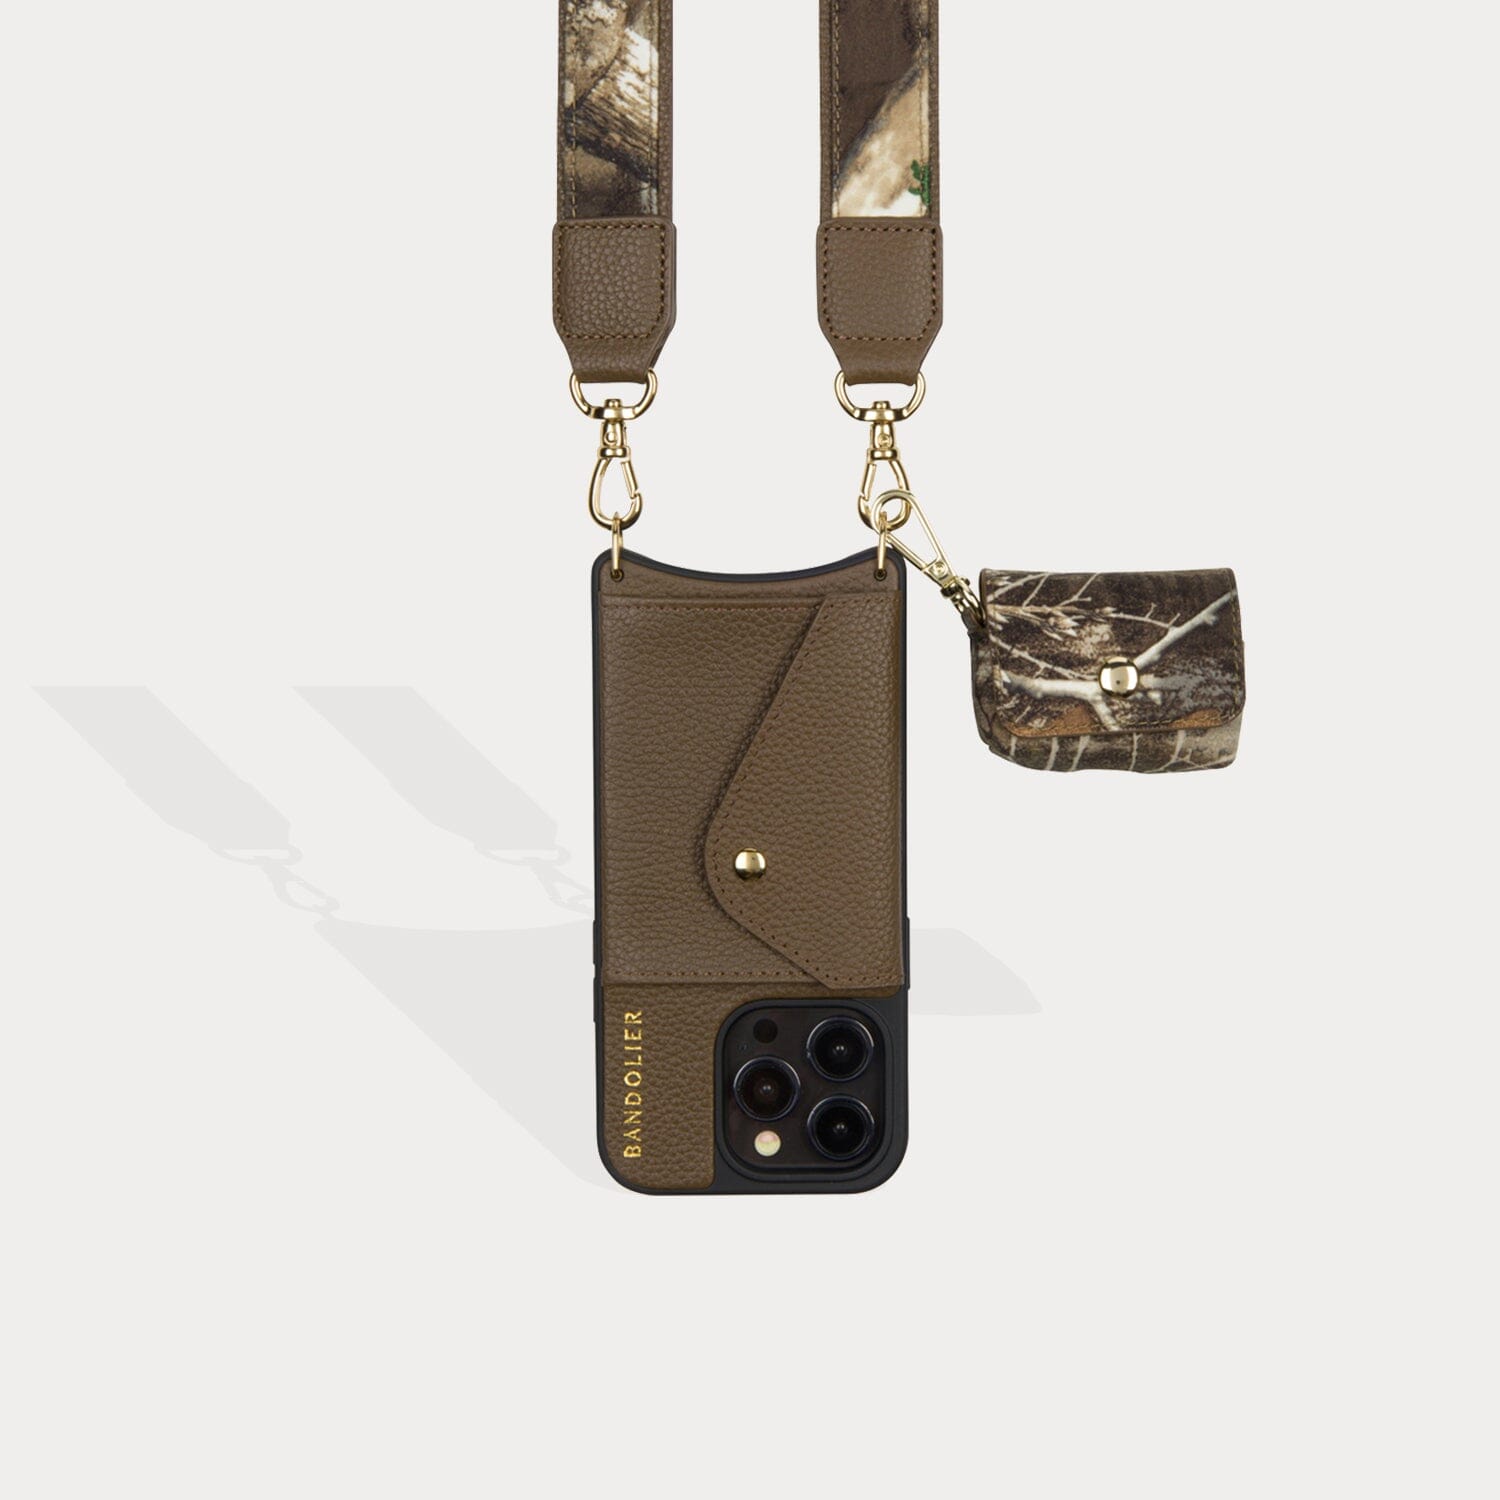 Avery AirPod Clip-On Pouch - Real Tree/Gold Pouch Core Bandolier 